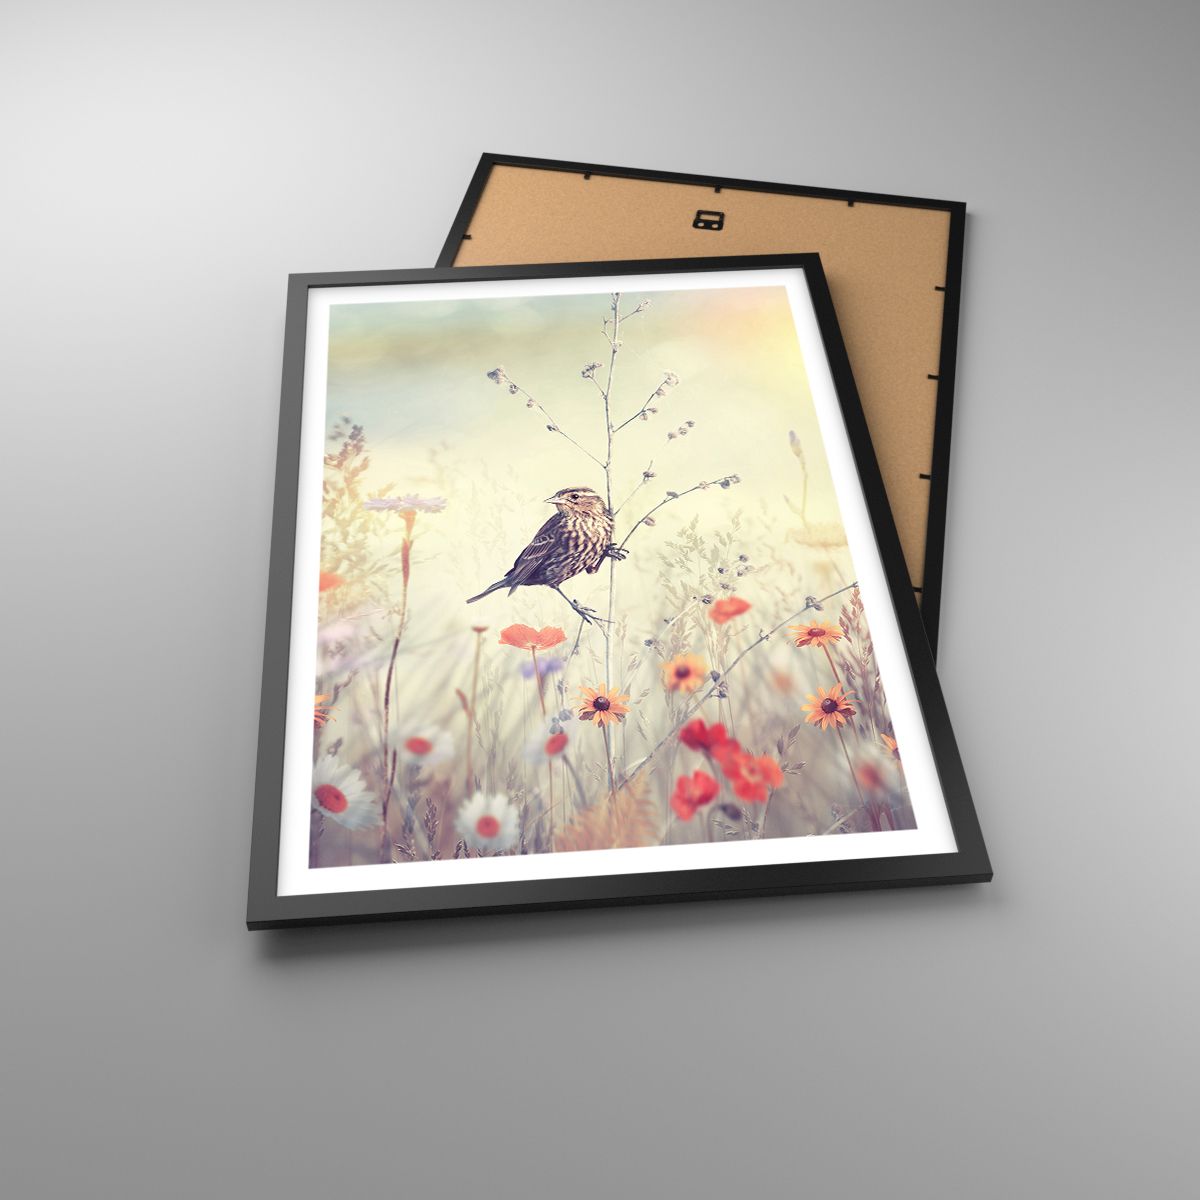 Poster Bird, Poster Meadow, Poster Nature, Poster Field Flowers, Poster Sparrow